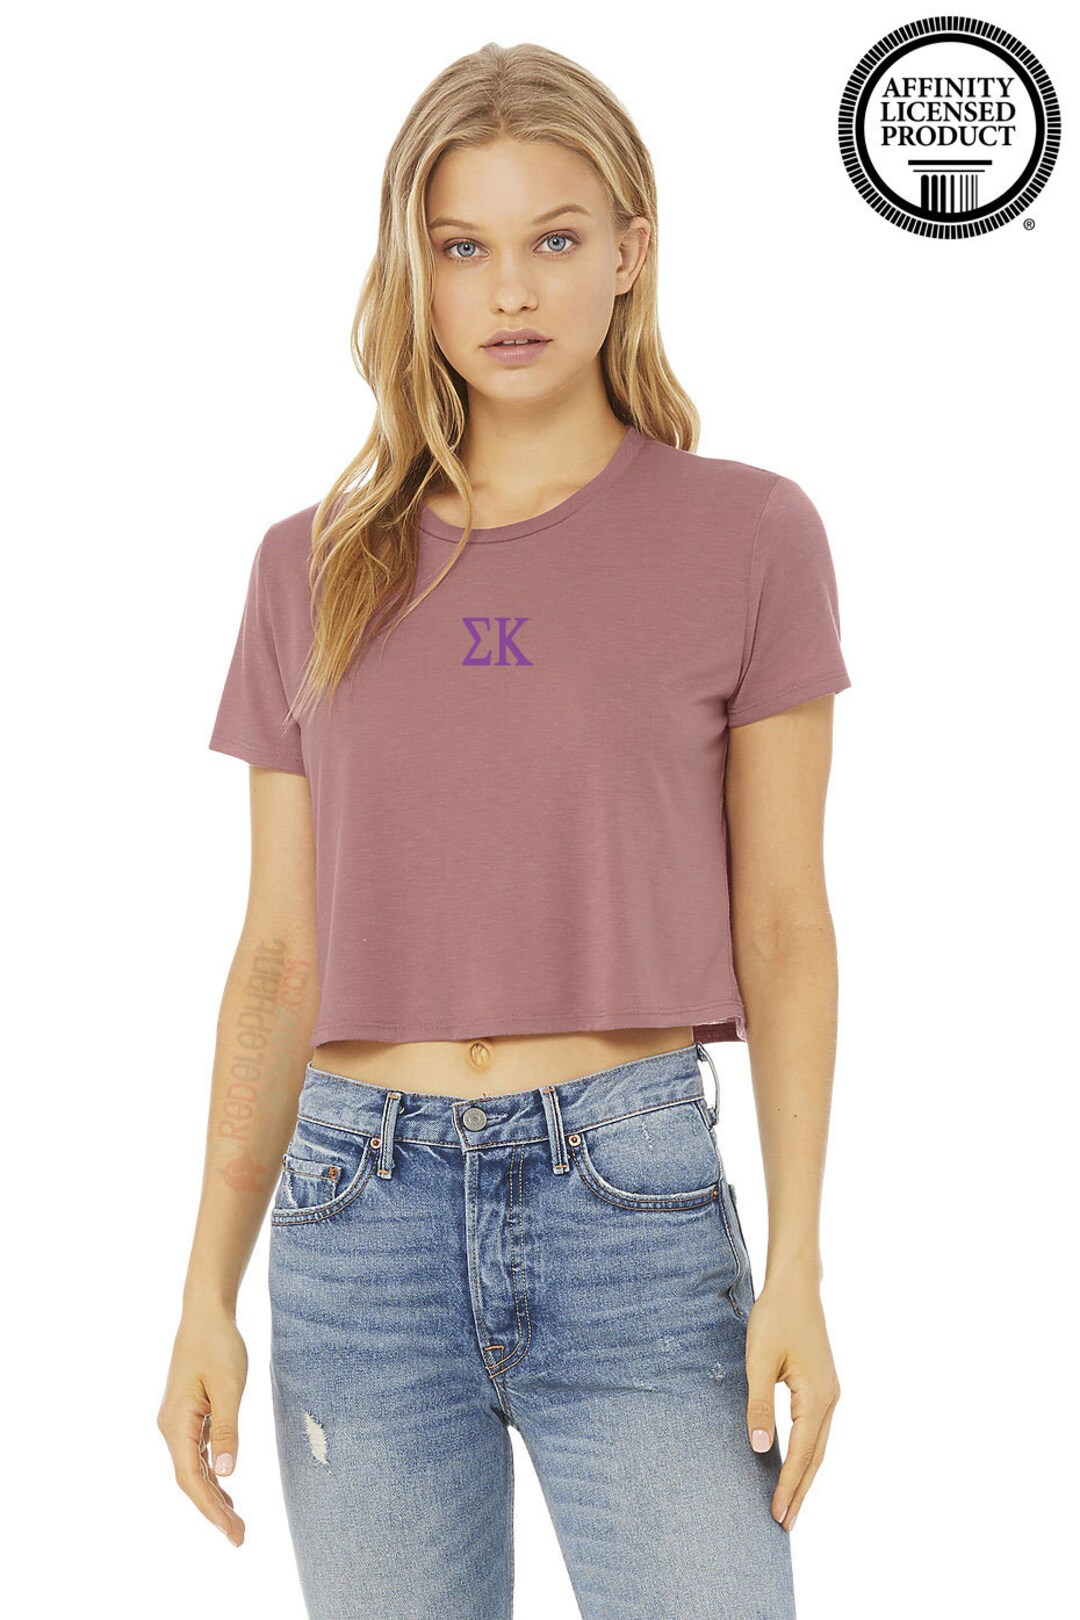 Sigma Kappa Crop Top Embroidered Greek Letters Sorority Baby - Etsy